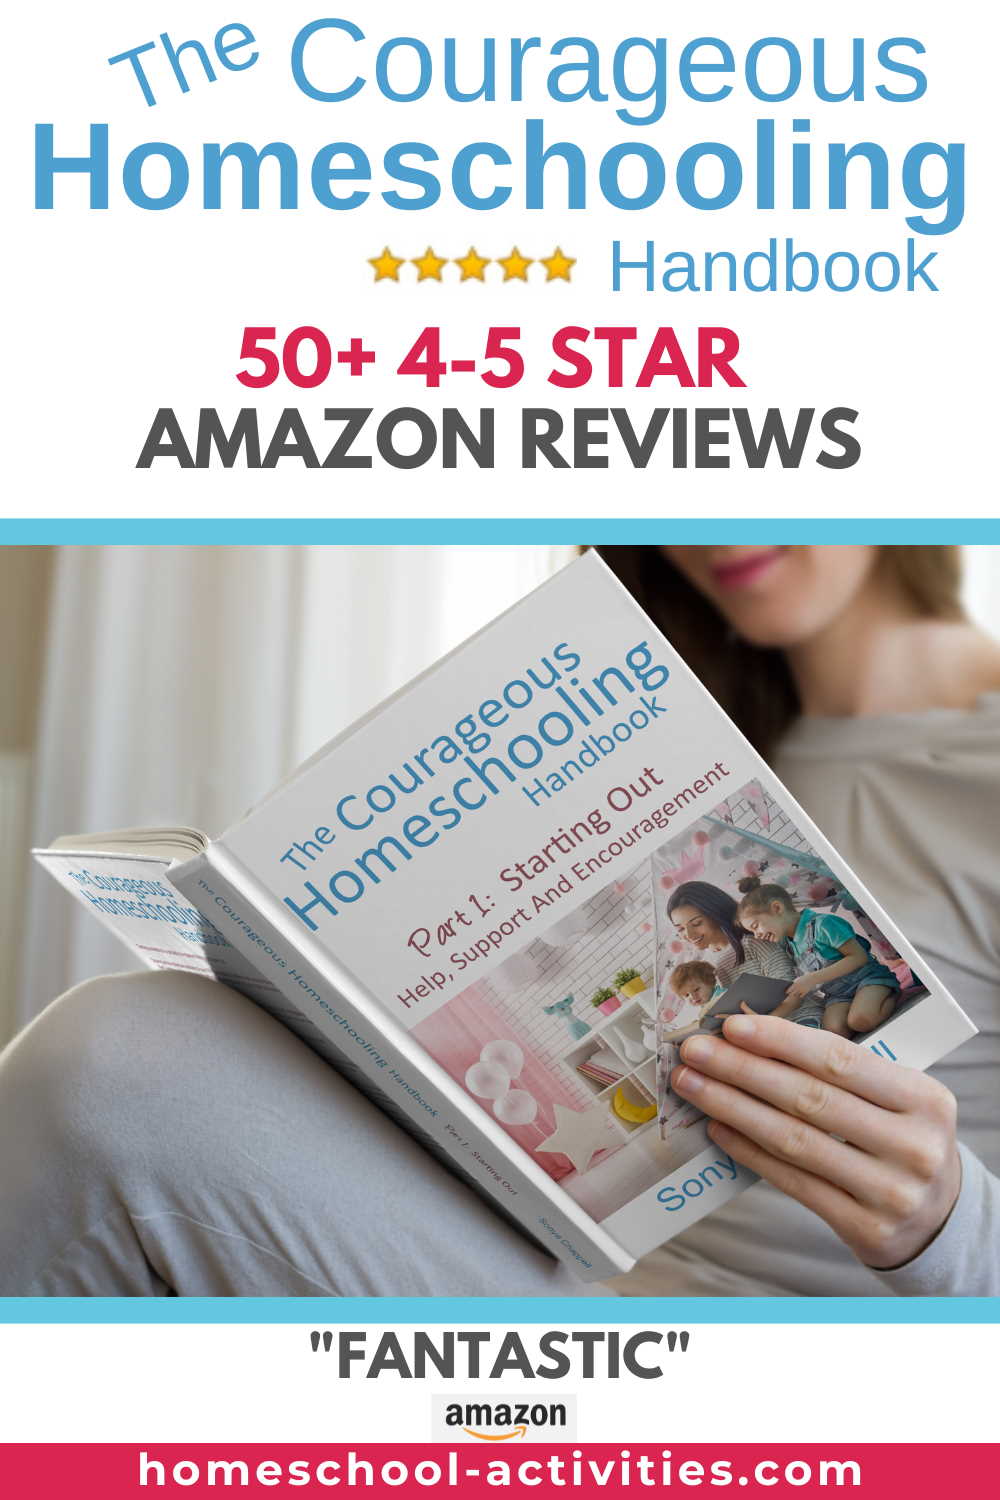 The Courageous Homeschooling Handbook with 50 4-5 star Amazon reviews